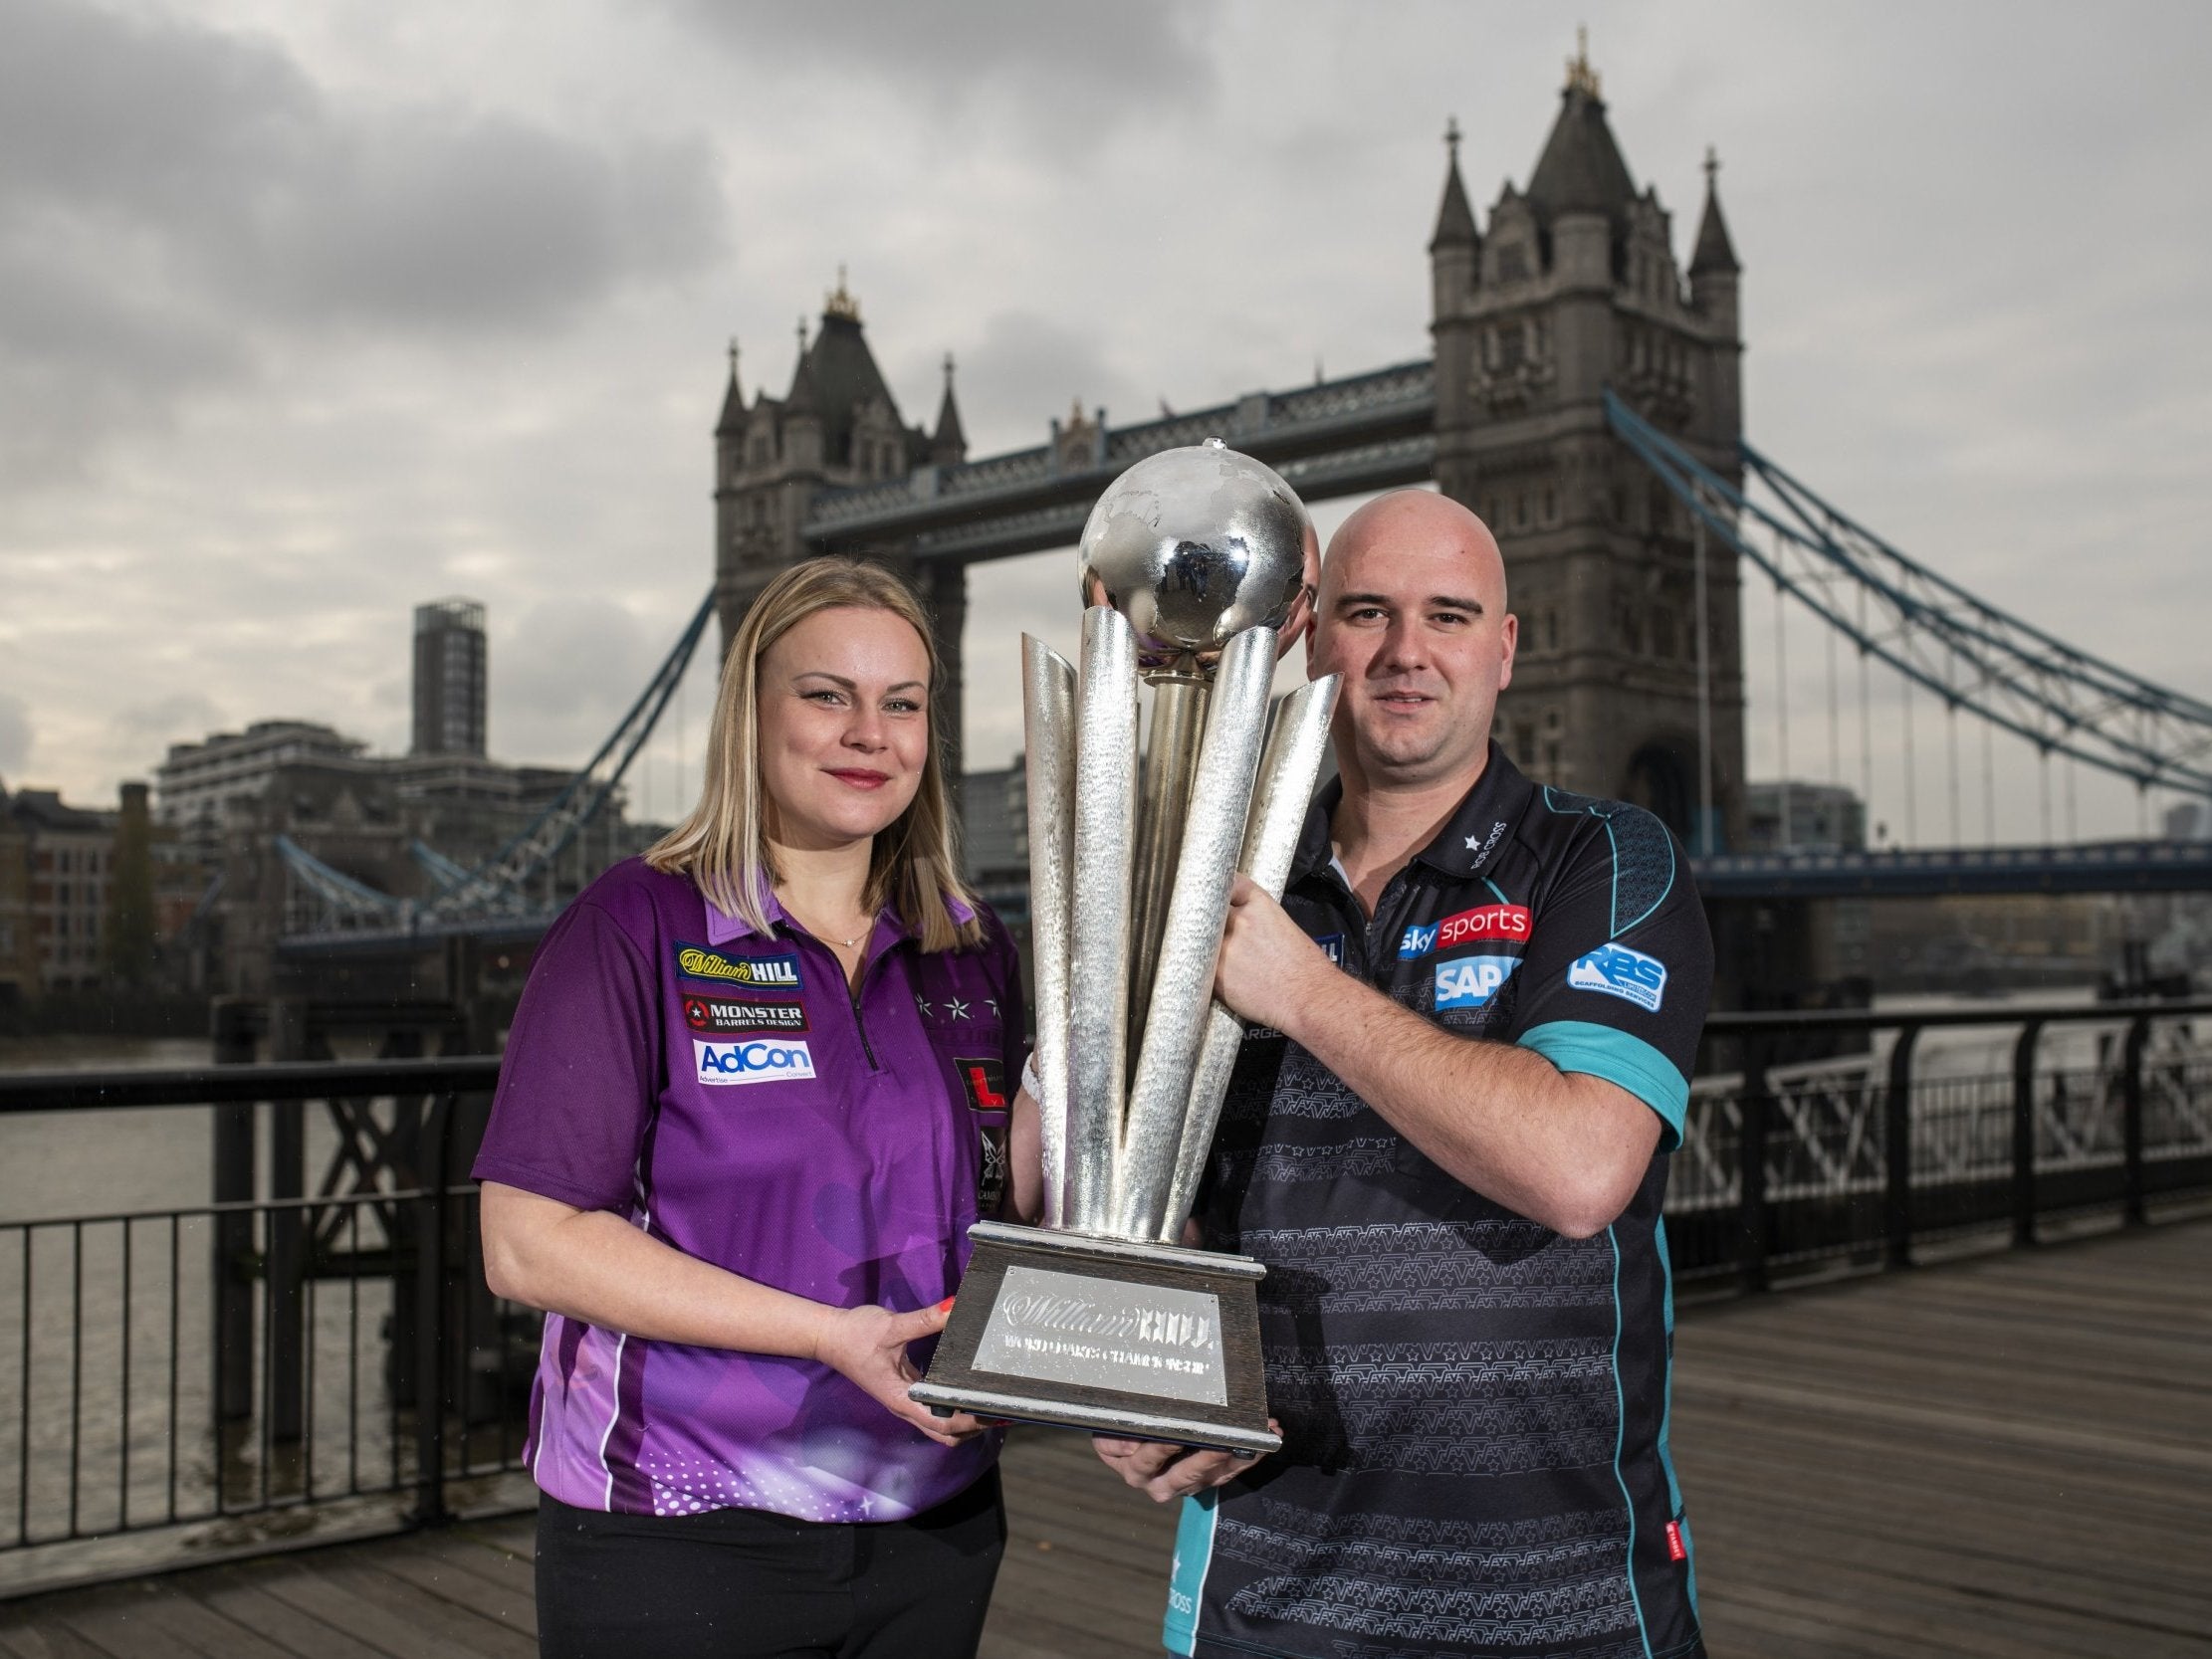 Reigning world champion Rob Cross and Anastasia Dobromyslova will compete at the Alexandra Palace this month